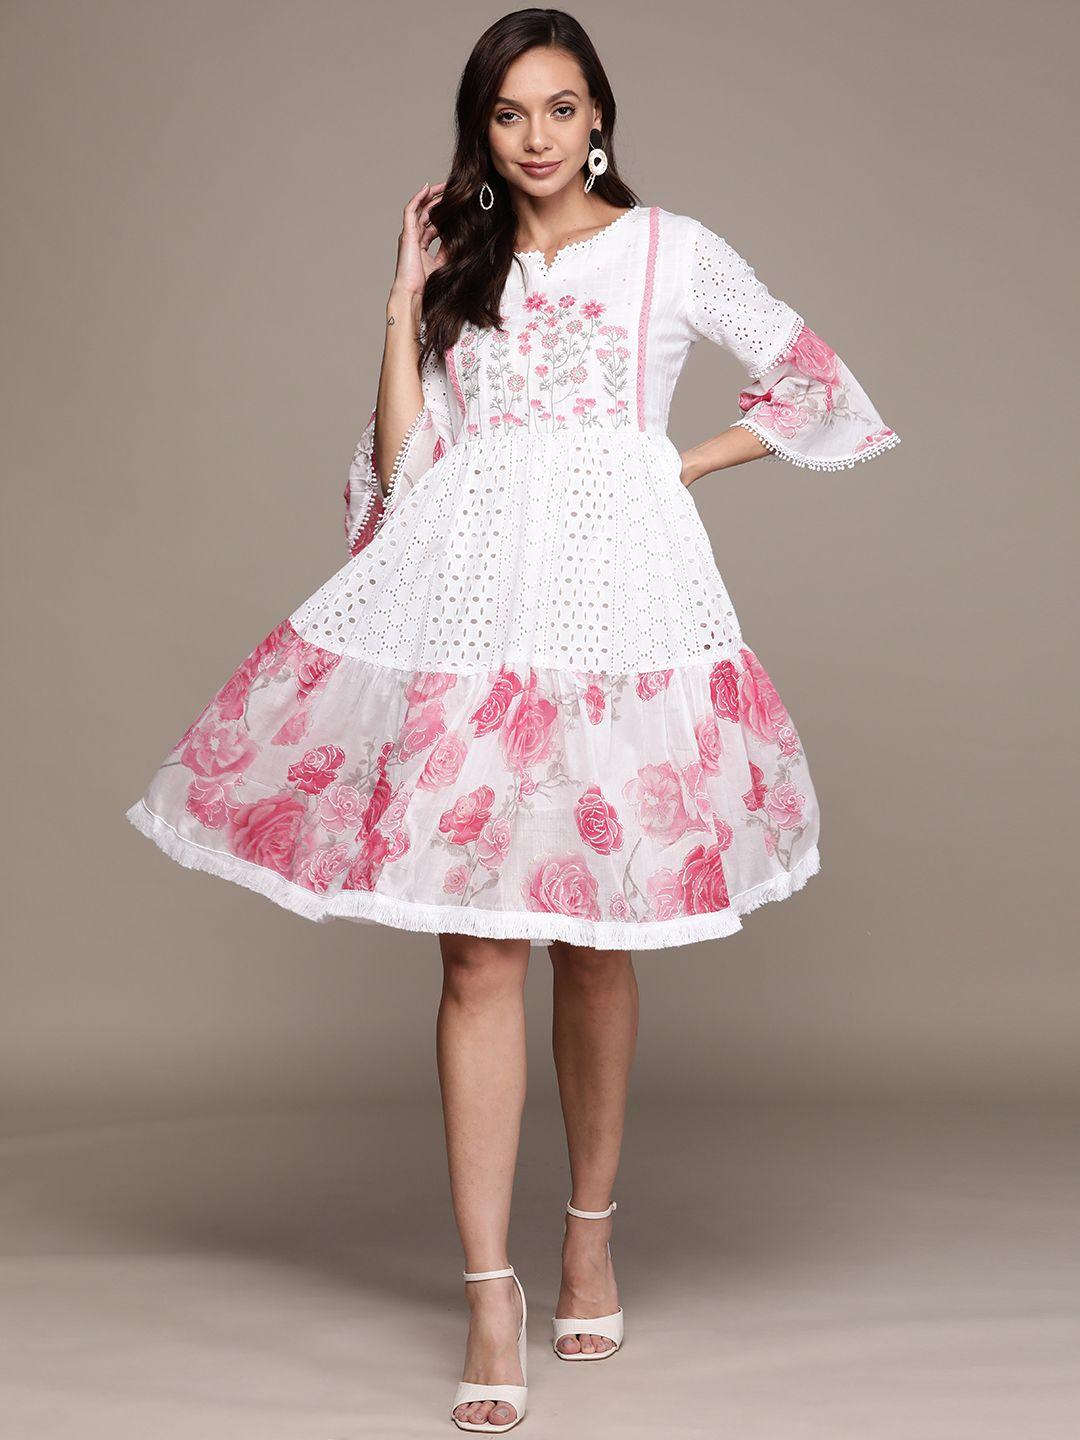 ishin white & pink floral embroidered a-line dress